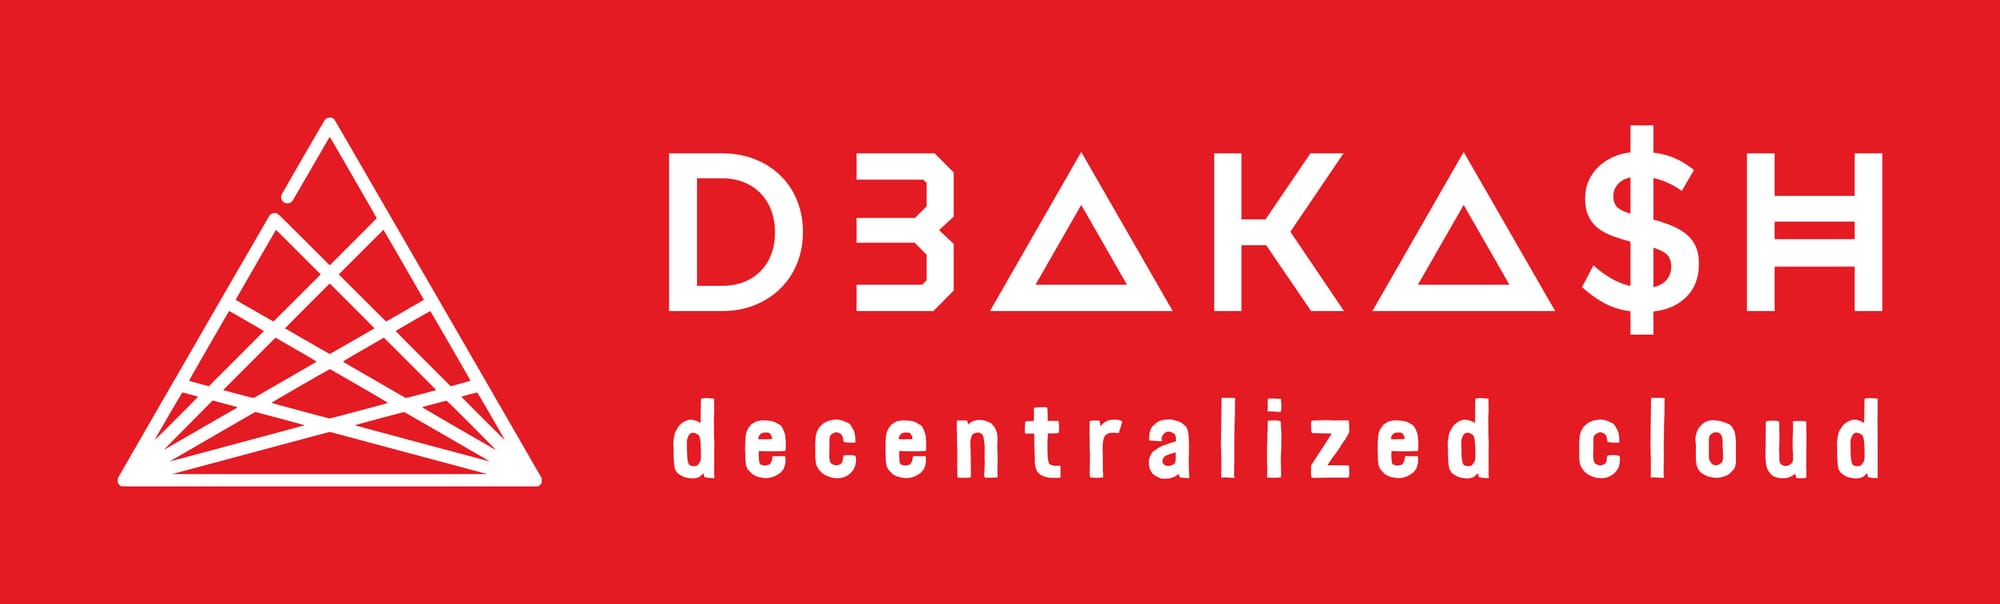 d3akash.cloud - your favorite DePIN - Decentralized Physical Infrastructure Network Provider on Akash